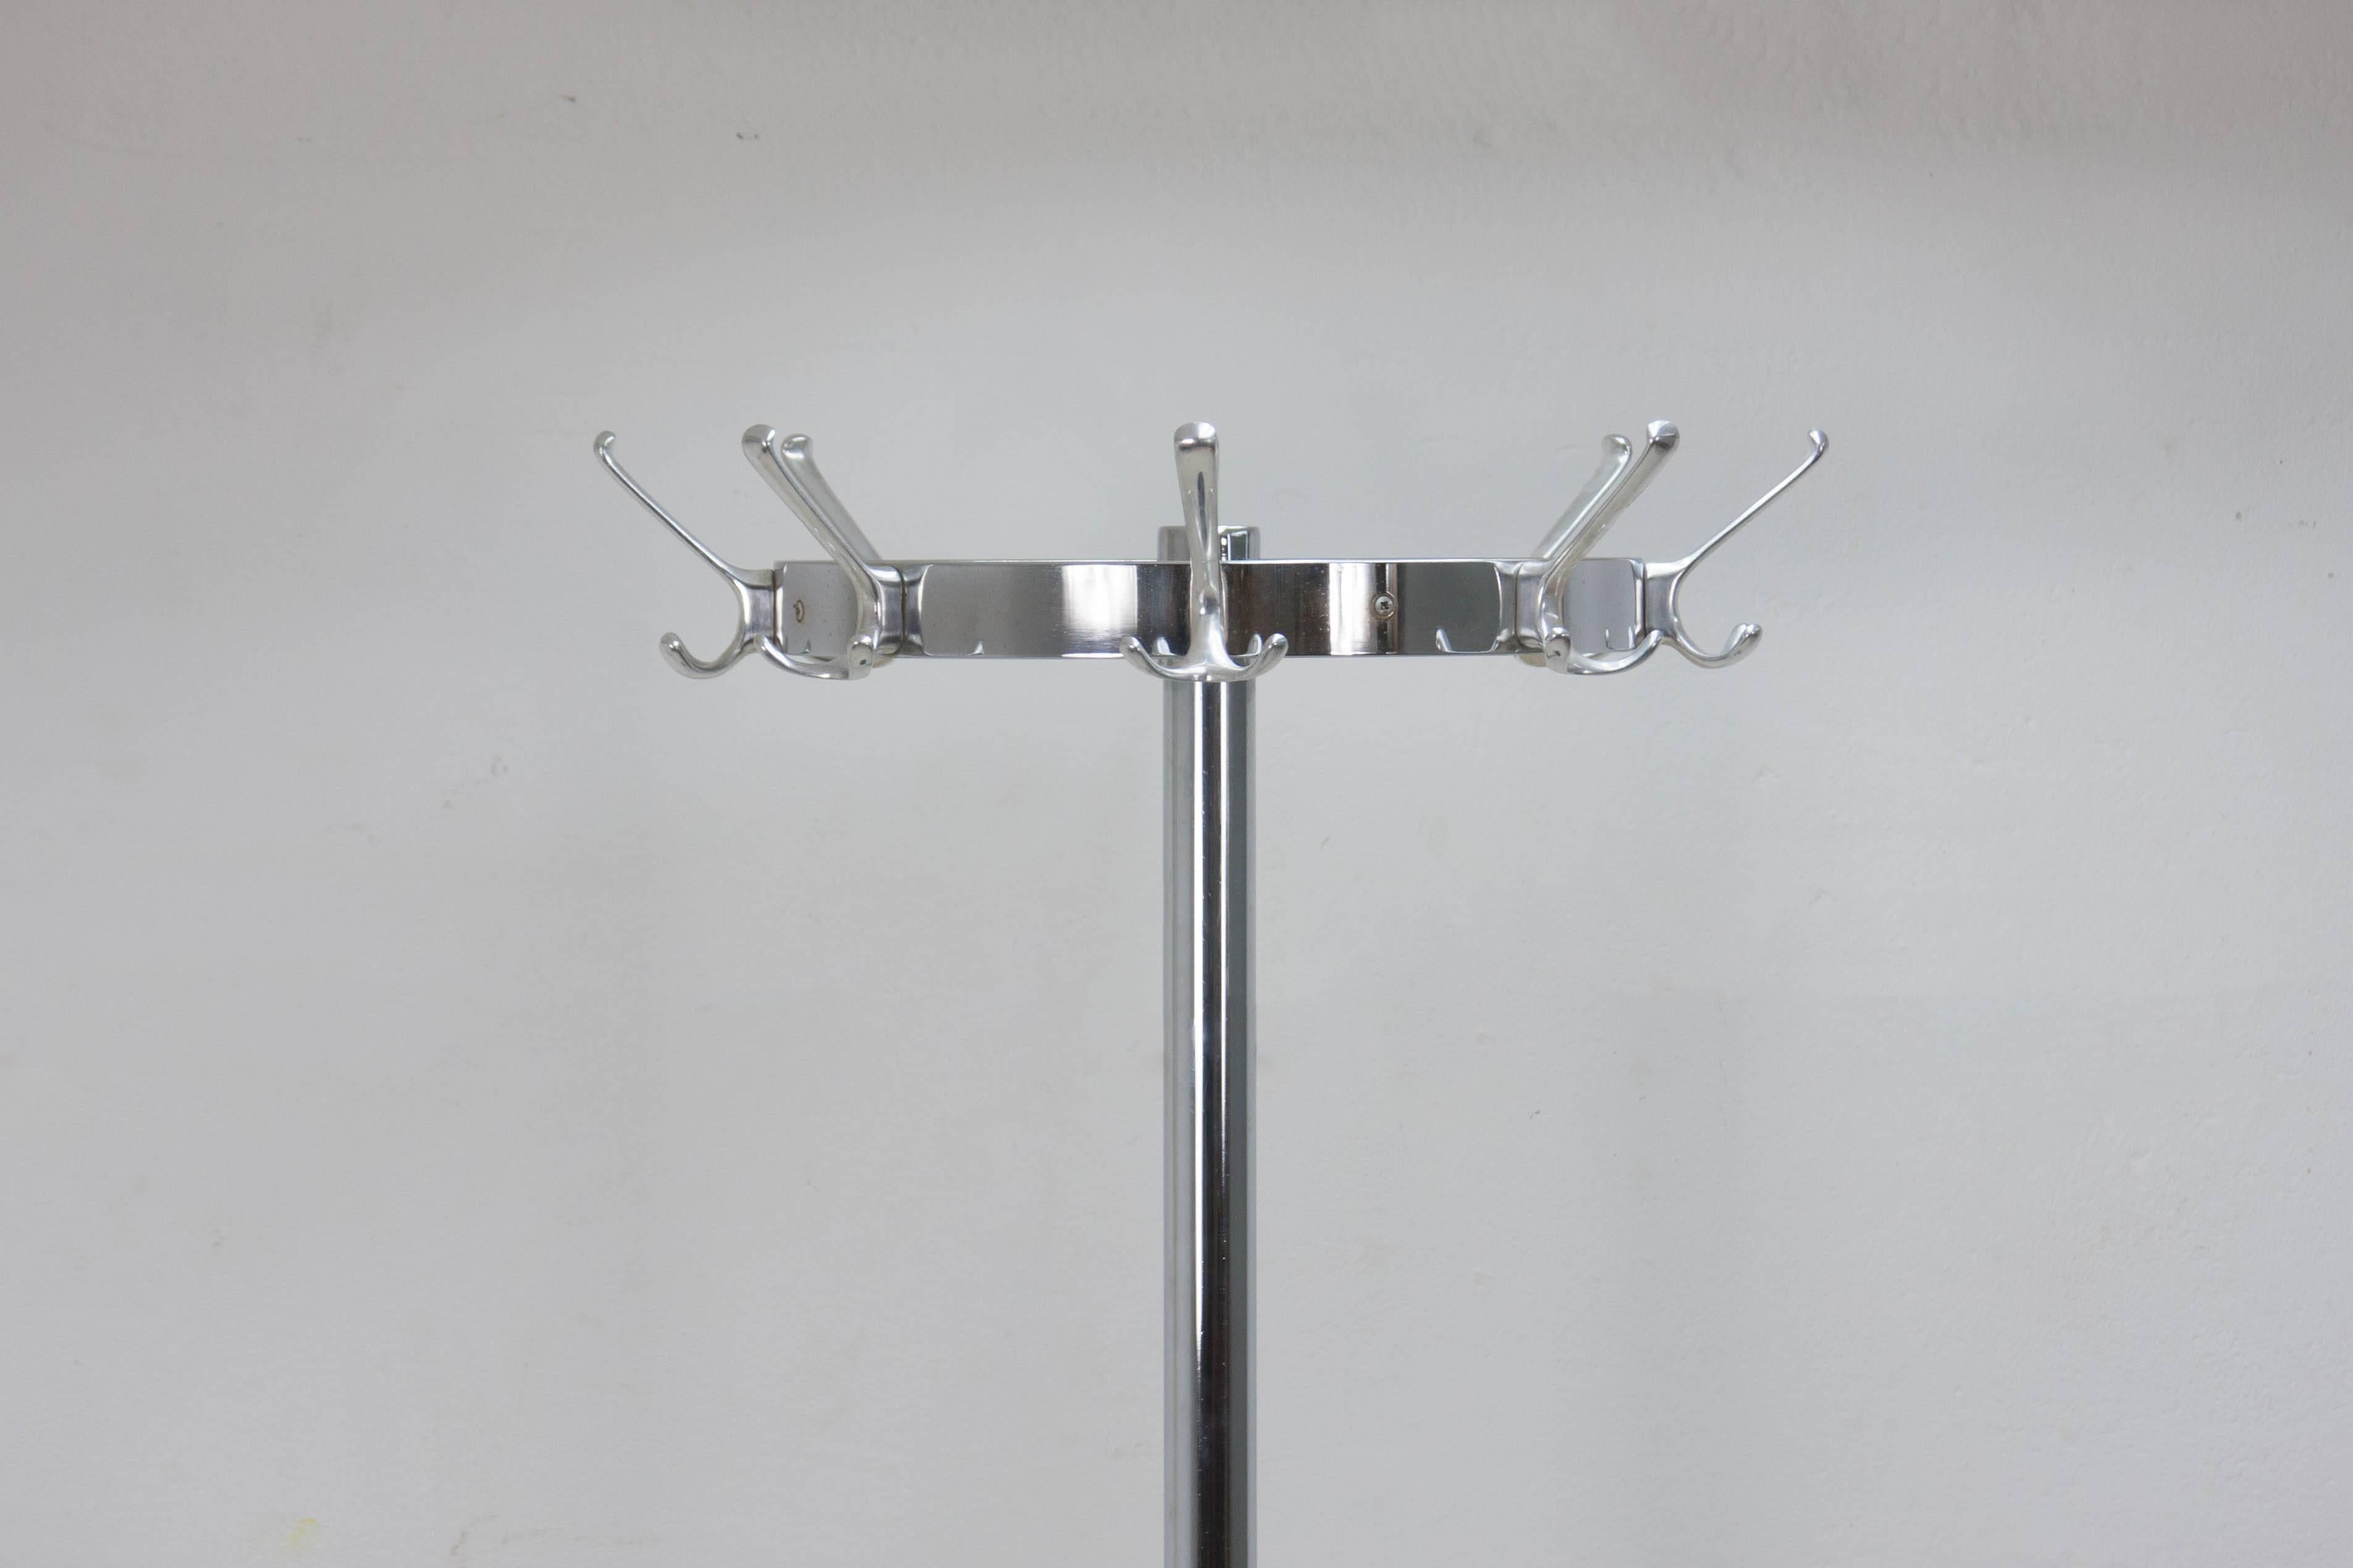 Minimal Gispen industrial coat rack from the early 1960s. This example is in very good condition.